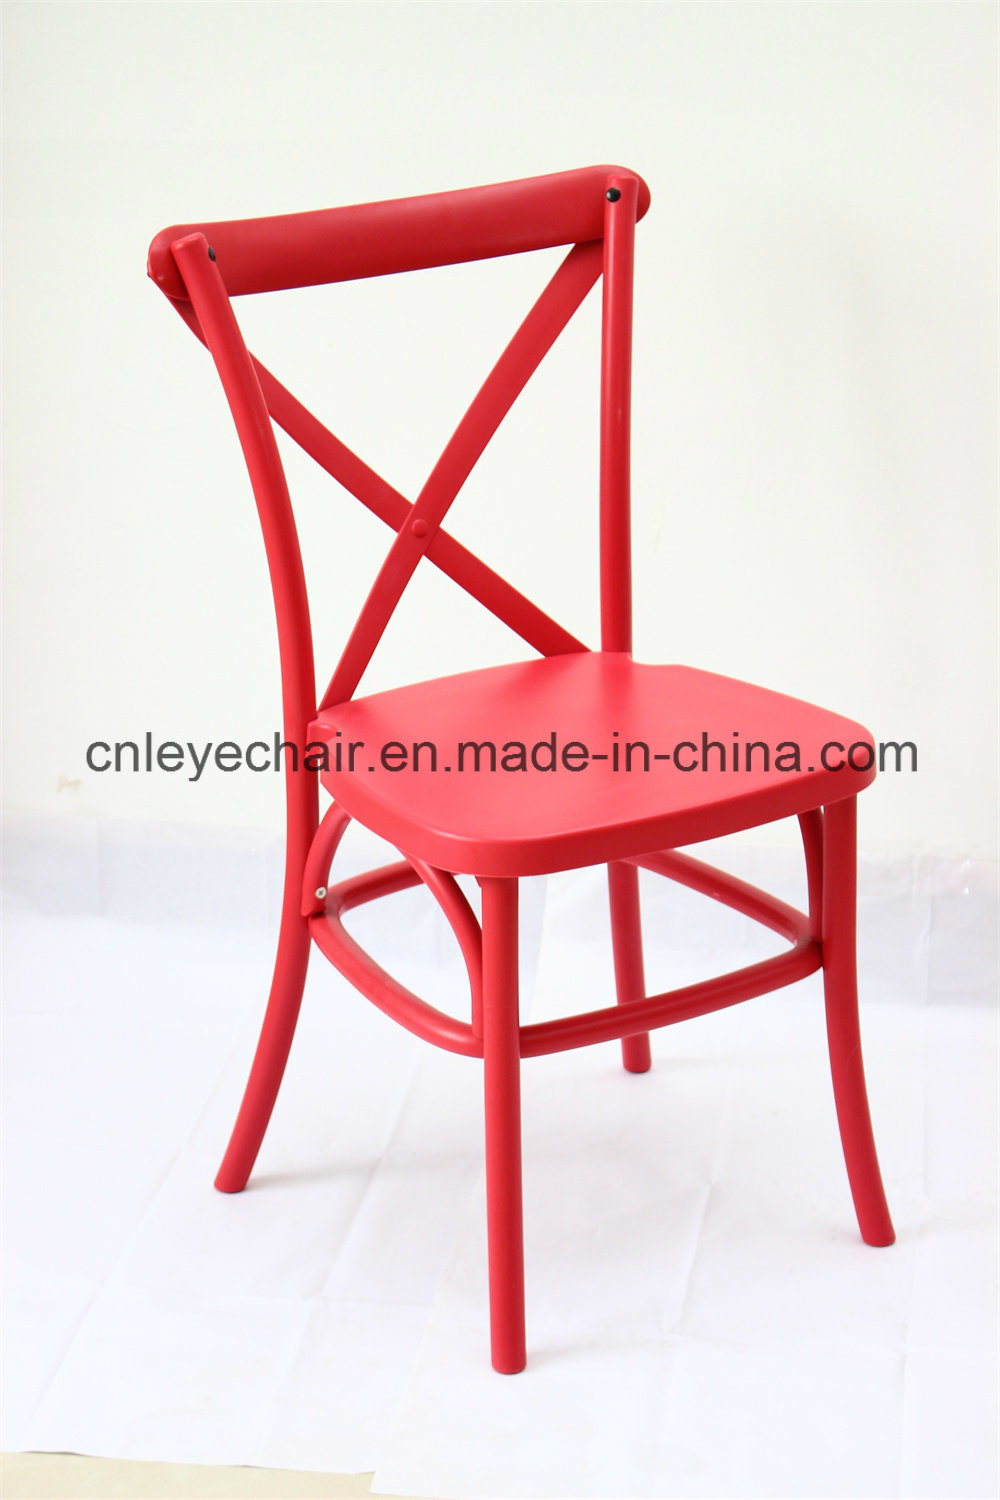 Hotel Dining Chair/Outdoor Cross Back Chair/X Back Chair